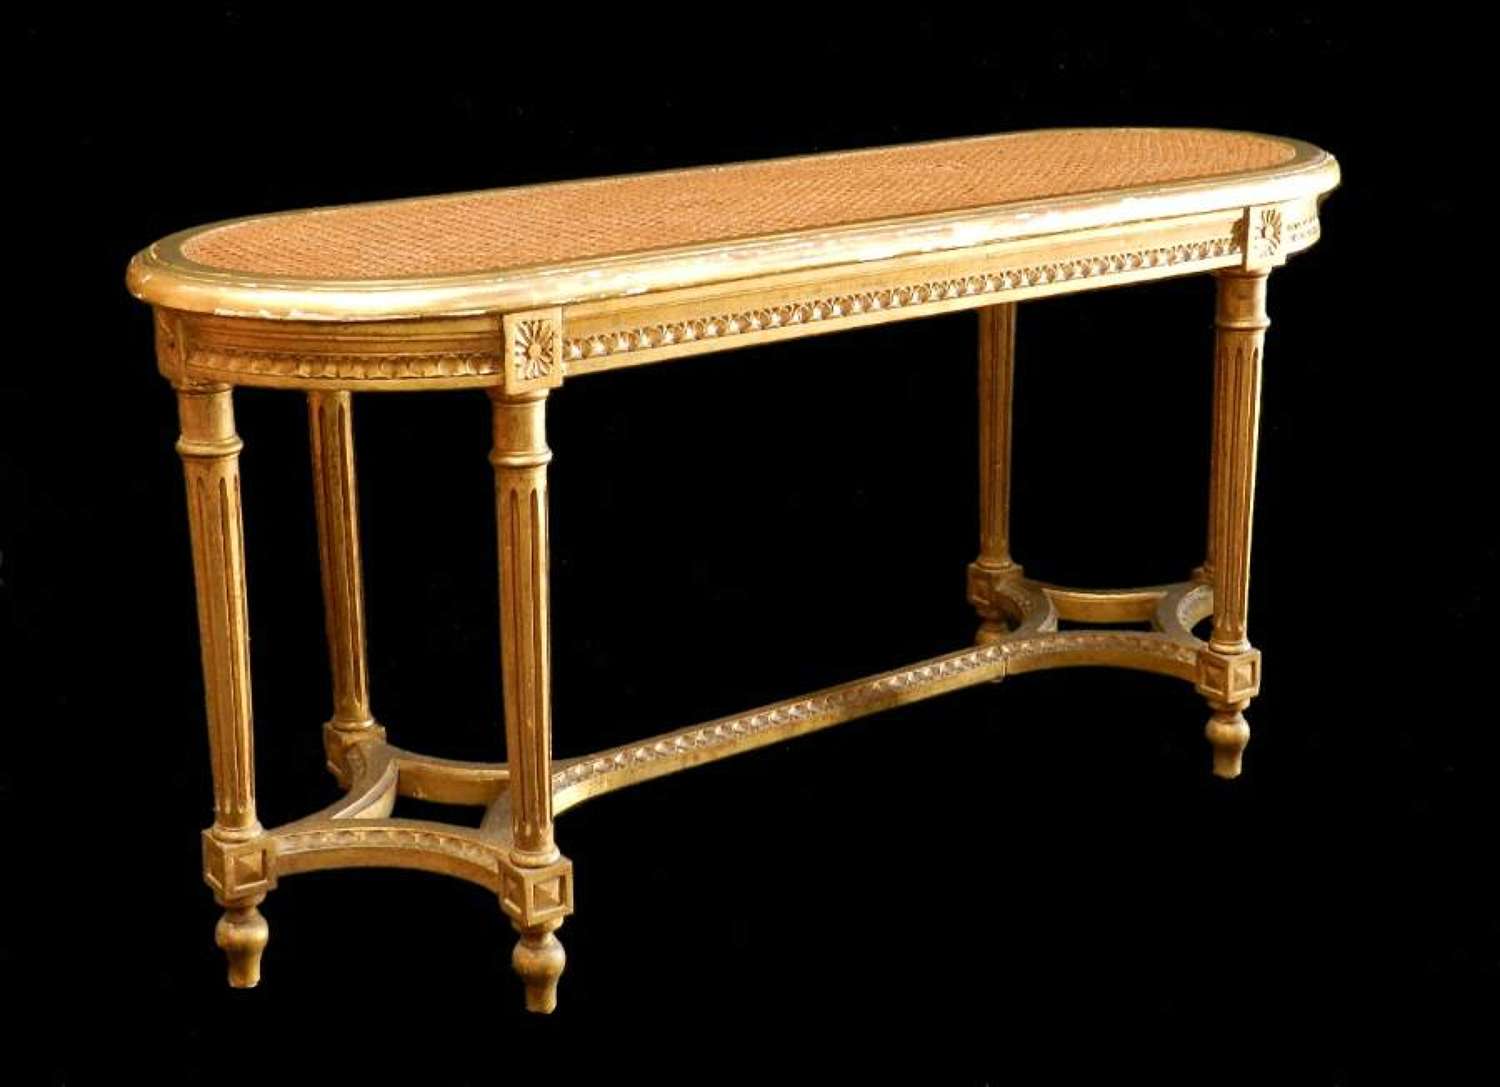 French Louis Giltwood Bout de Lit End of Bed Window Double Stool Bench